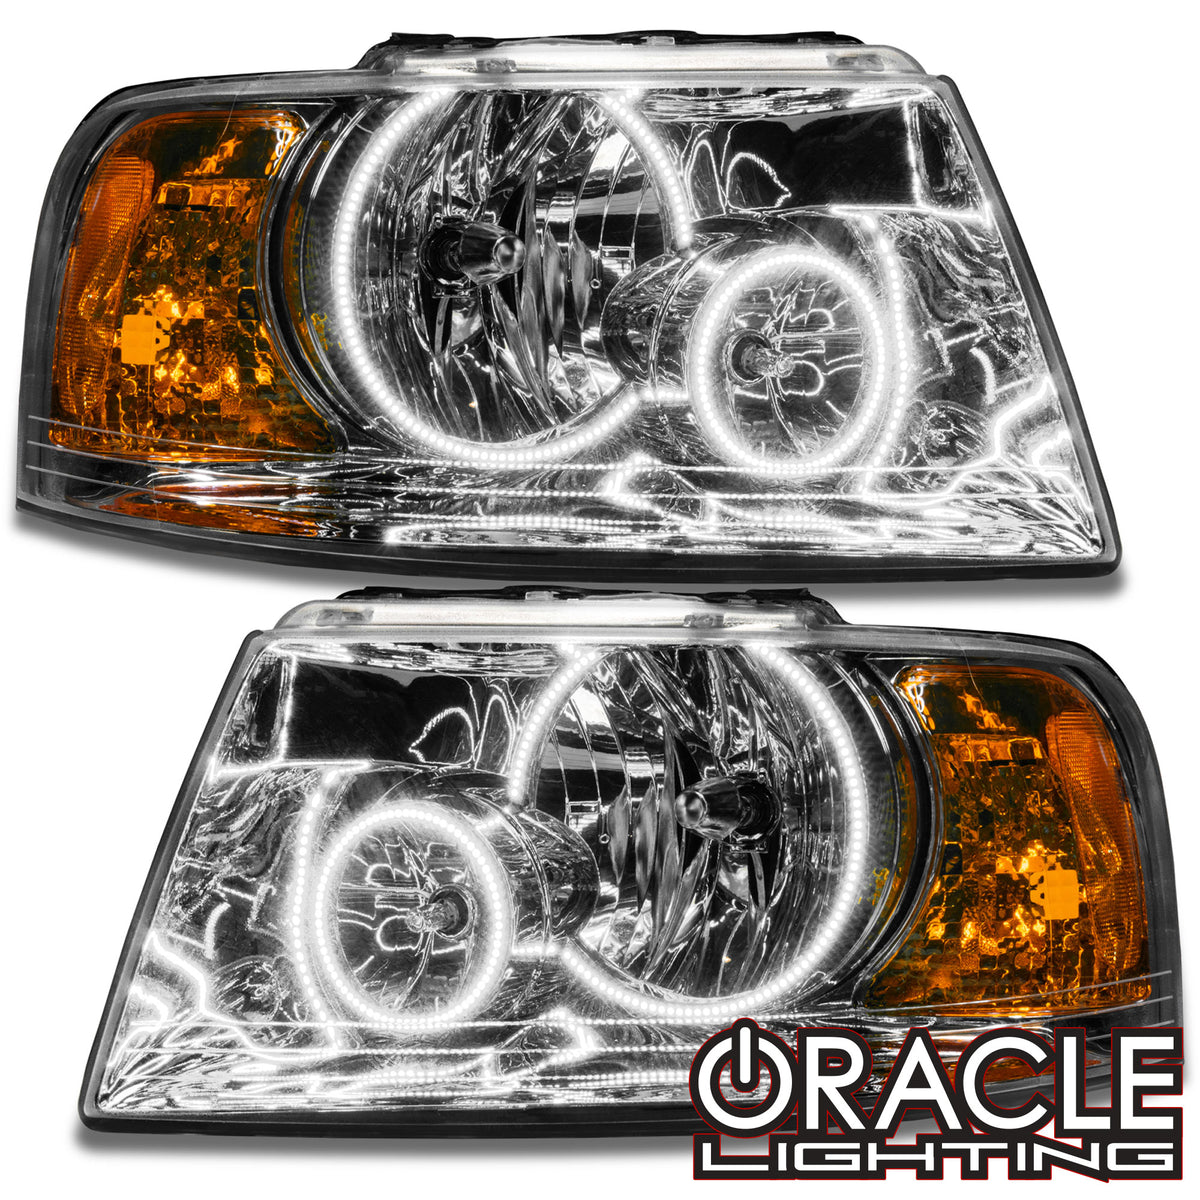 ORACLE Lighting 2003-2006 Ford Expedition Pre-Assembled Headlights - C